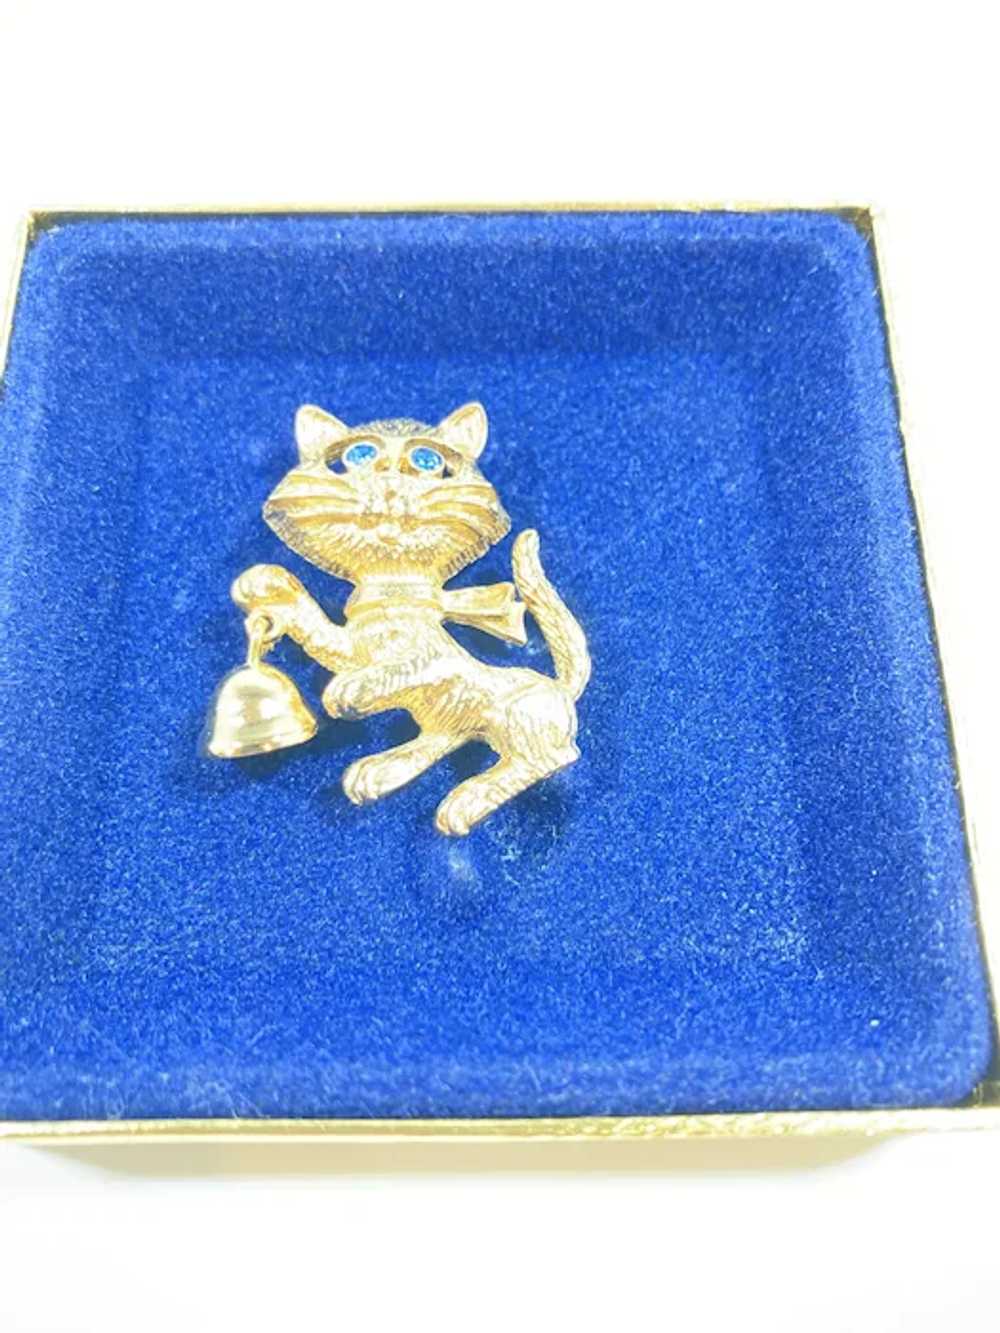 Avon Frisky Kitty Pin with Dangle Bell  Mint in O… - image 3